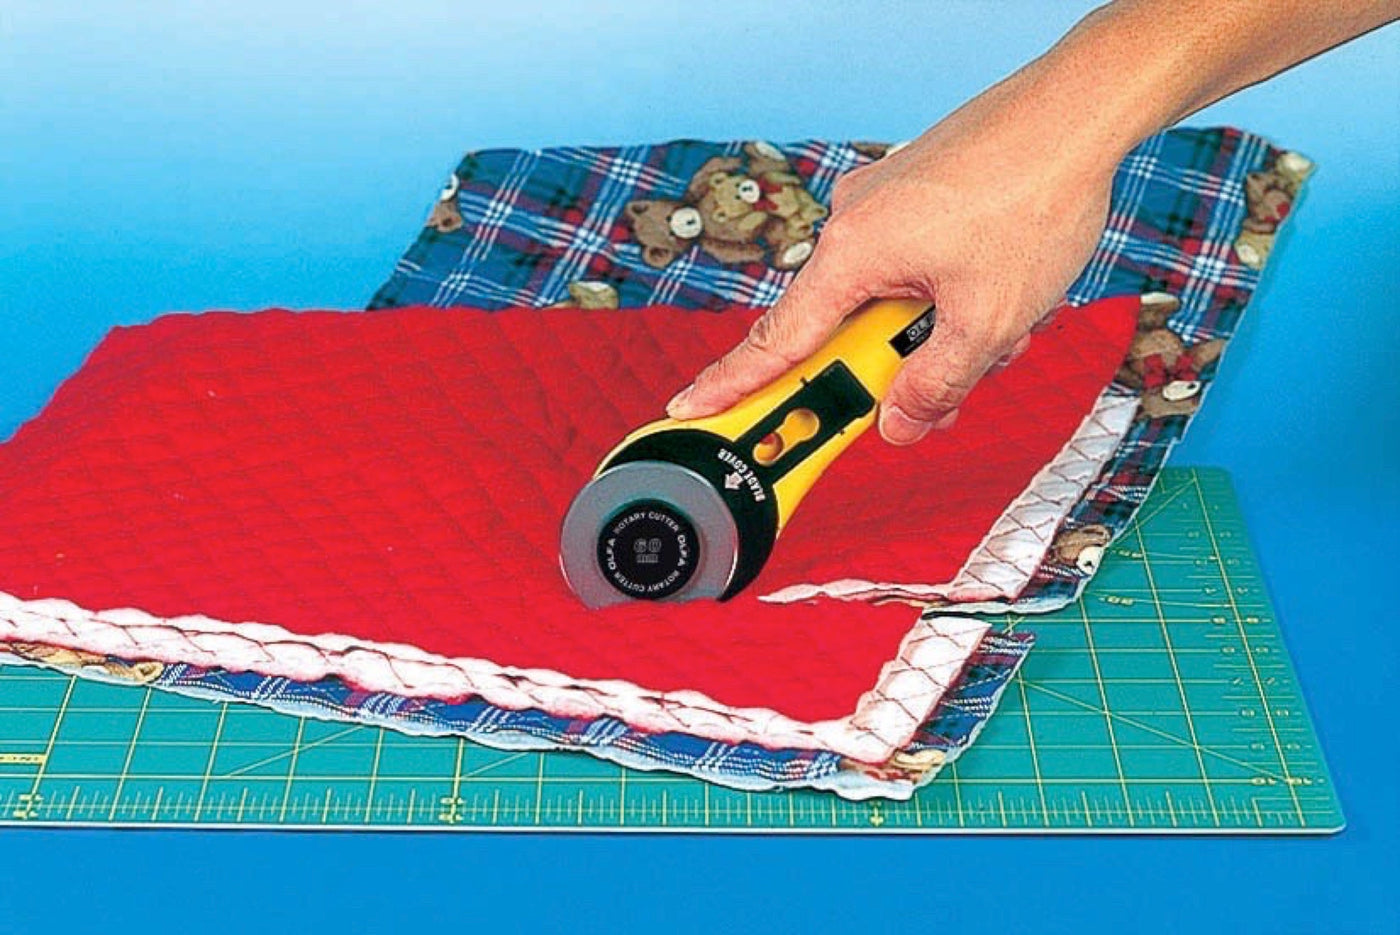 Photo shows rotary cutters in action cutting multiple layers of fabric on an OLFA cutting board